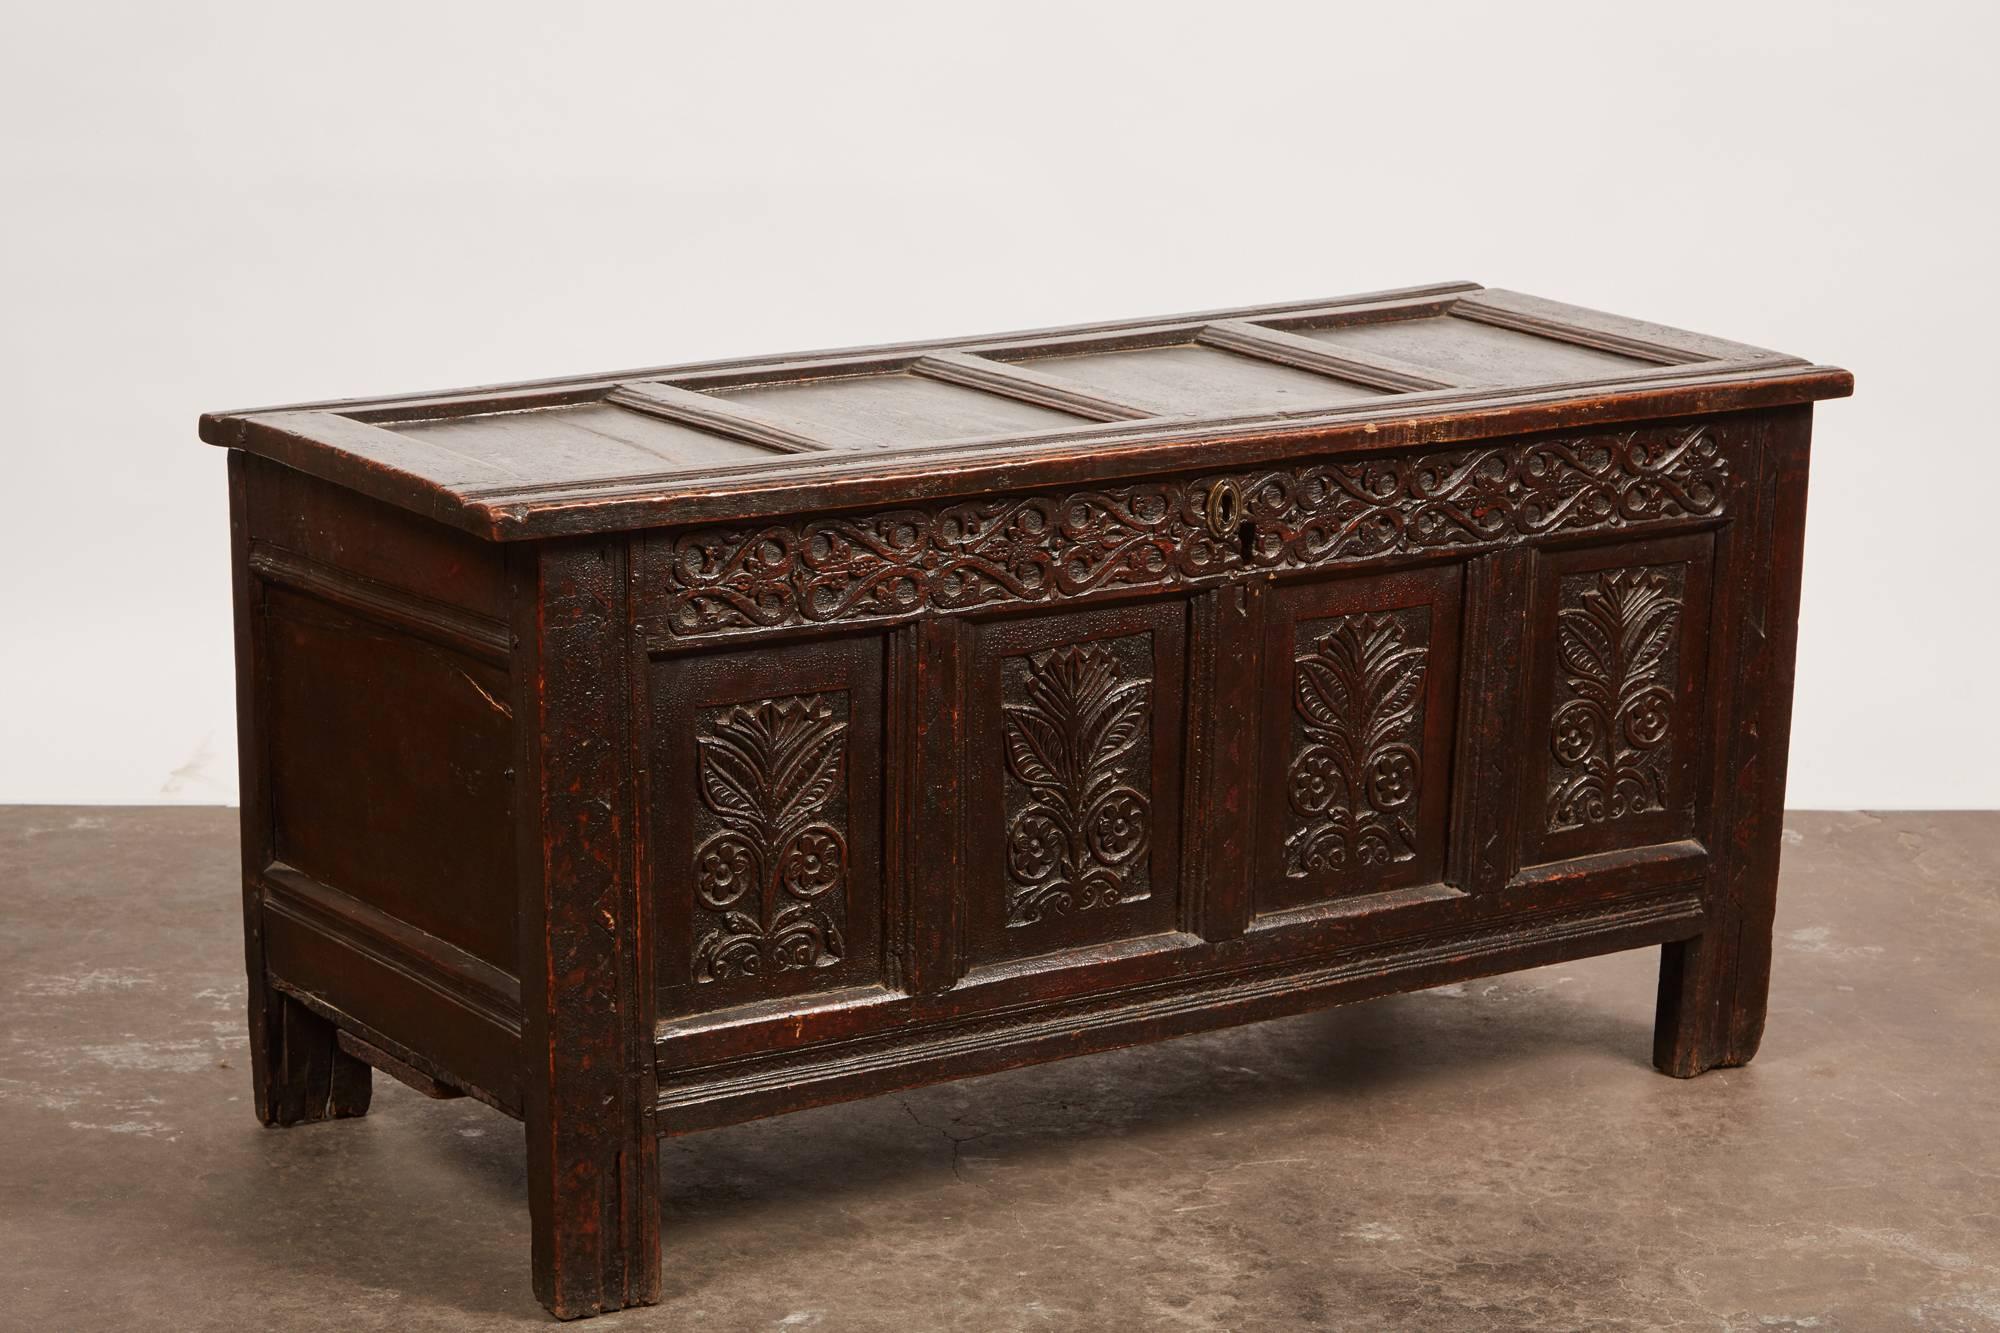 This late 18th century English carved oak trunk features intricate carvings on the facade. There are four panels with identical abstract flowers on each, as well as a row of continuous foliage designs carved above the panels.